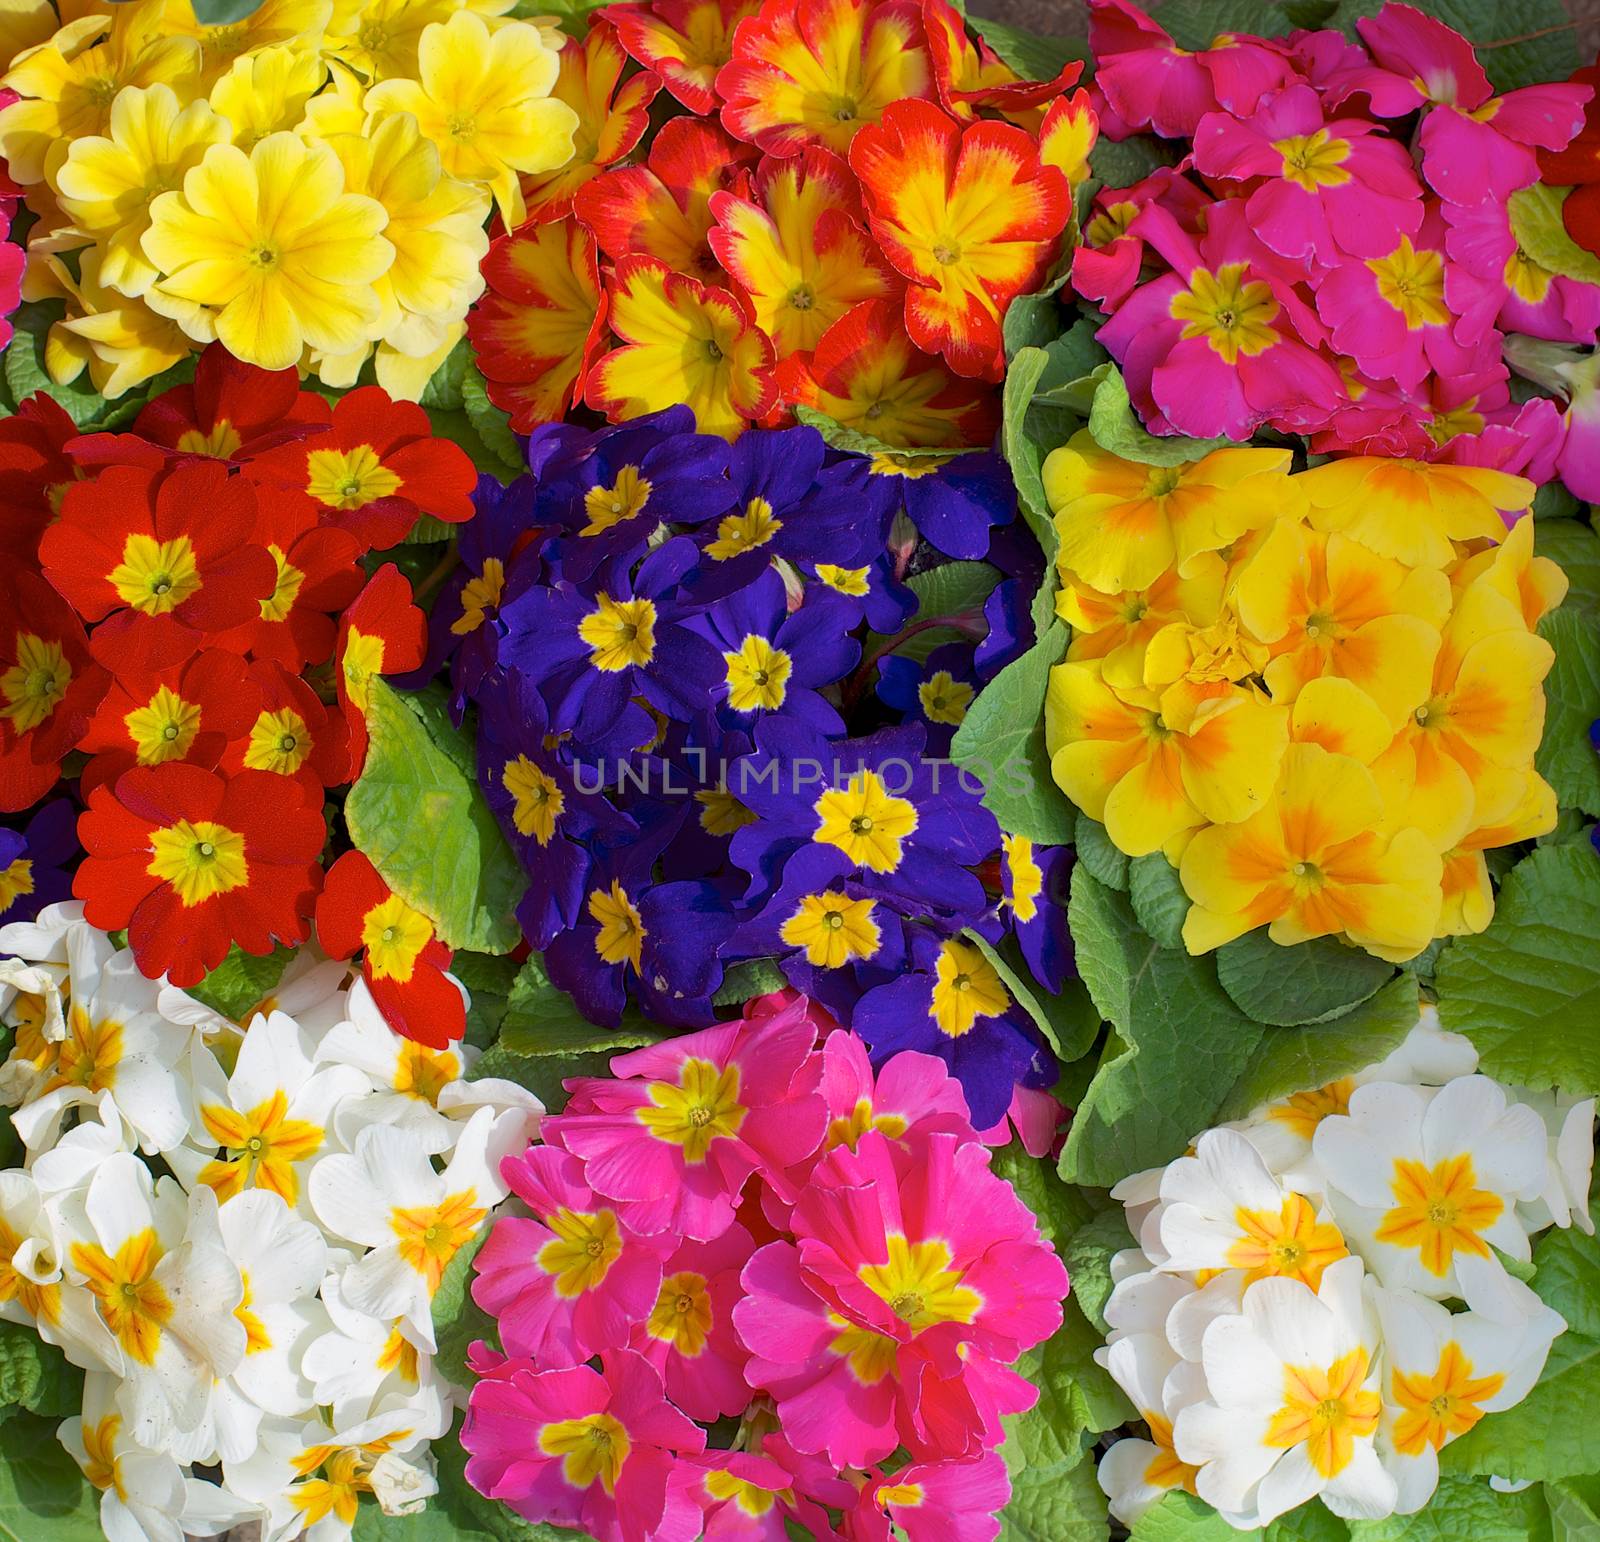 Background of Beauty Multi-Colored Primroses with Leafs closeup